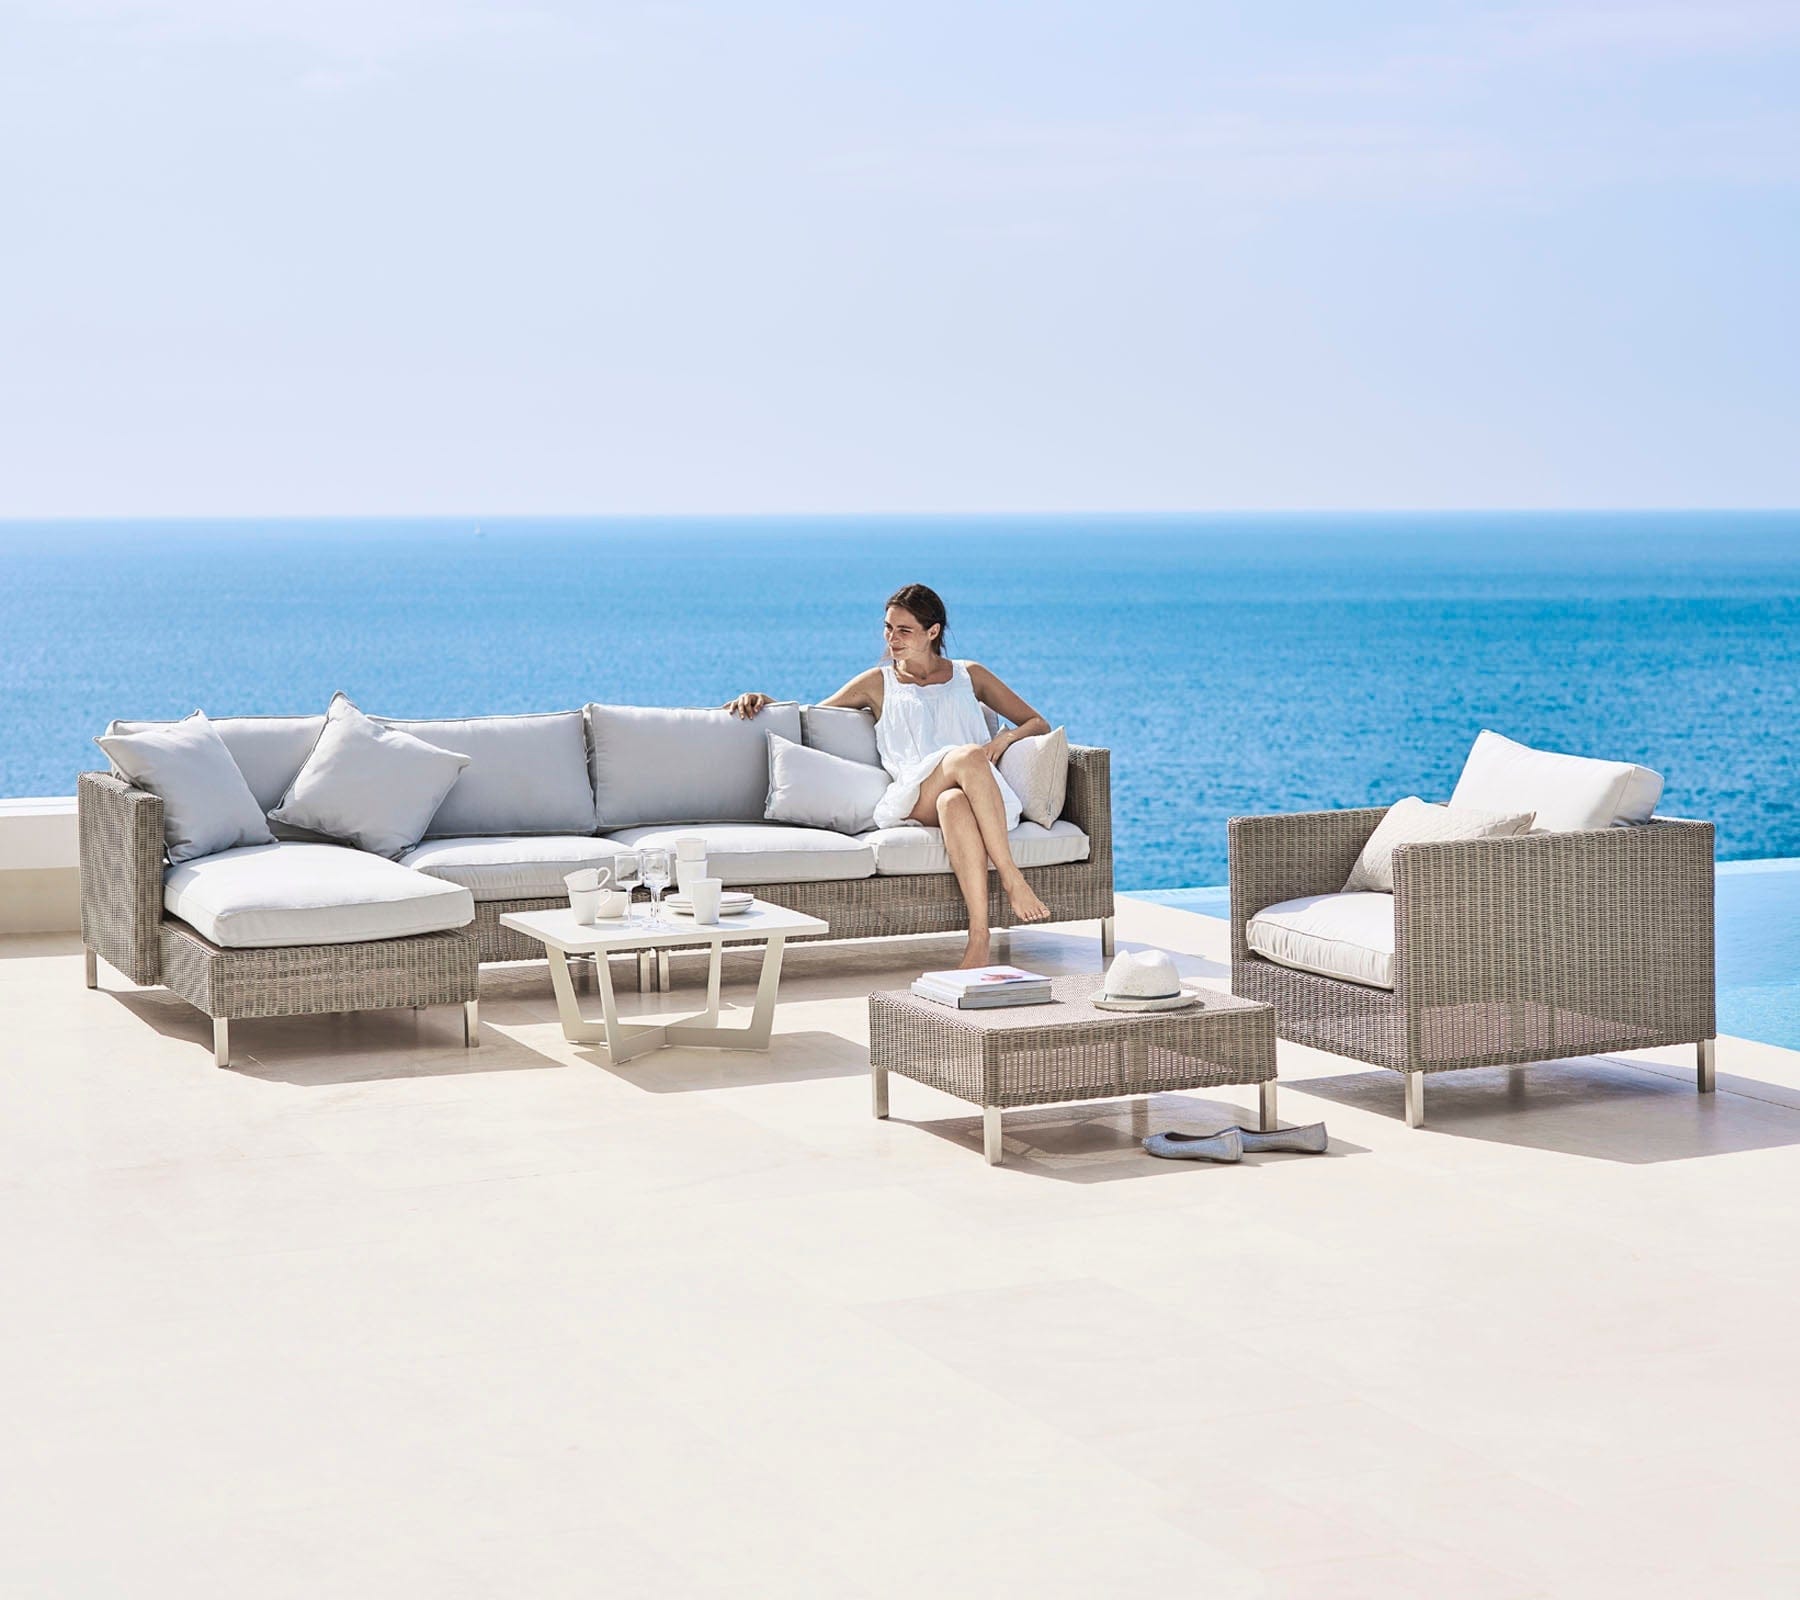 Boxhill's Connect 2-Seater Left Module Sofa lifestyle image with other Connect Module Sofa and Connect Lounge Chair with a woman sitting down